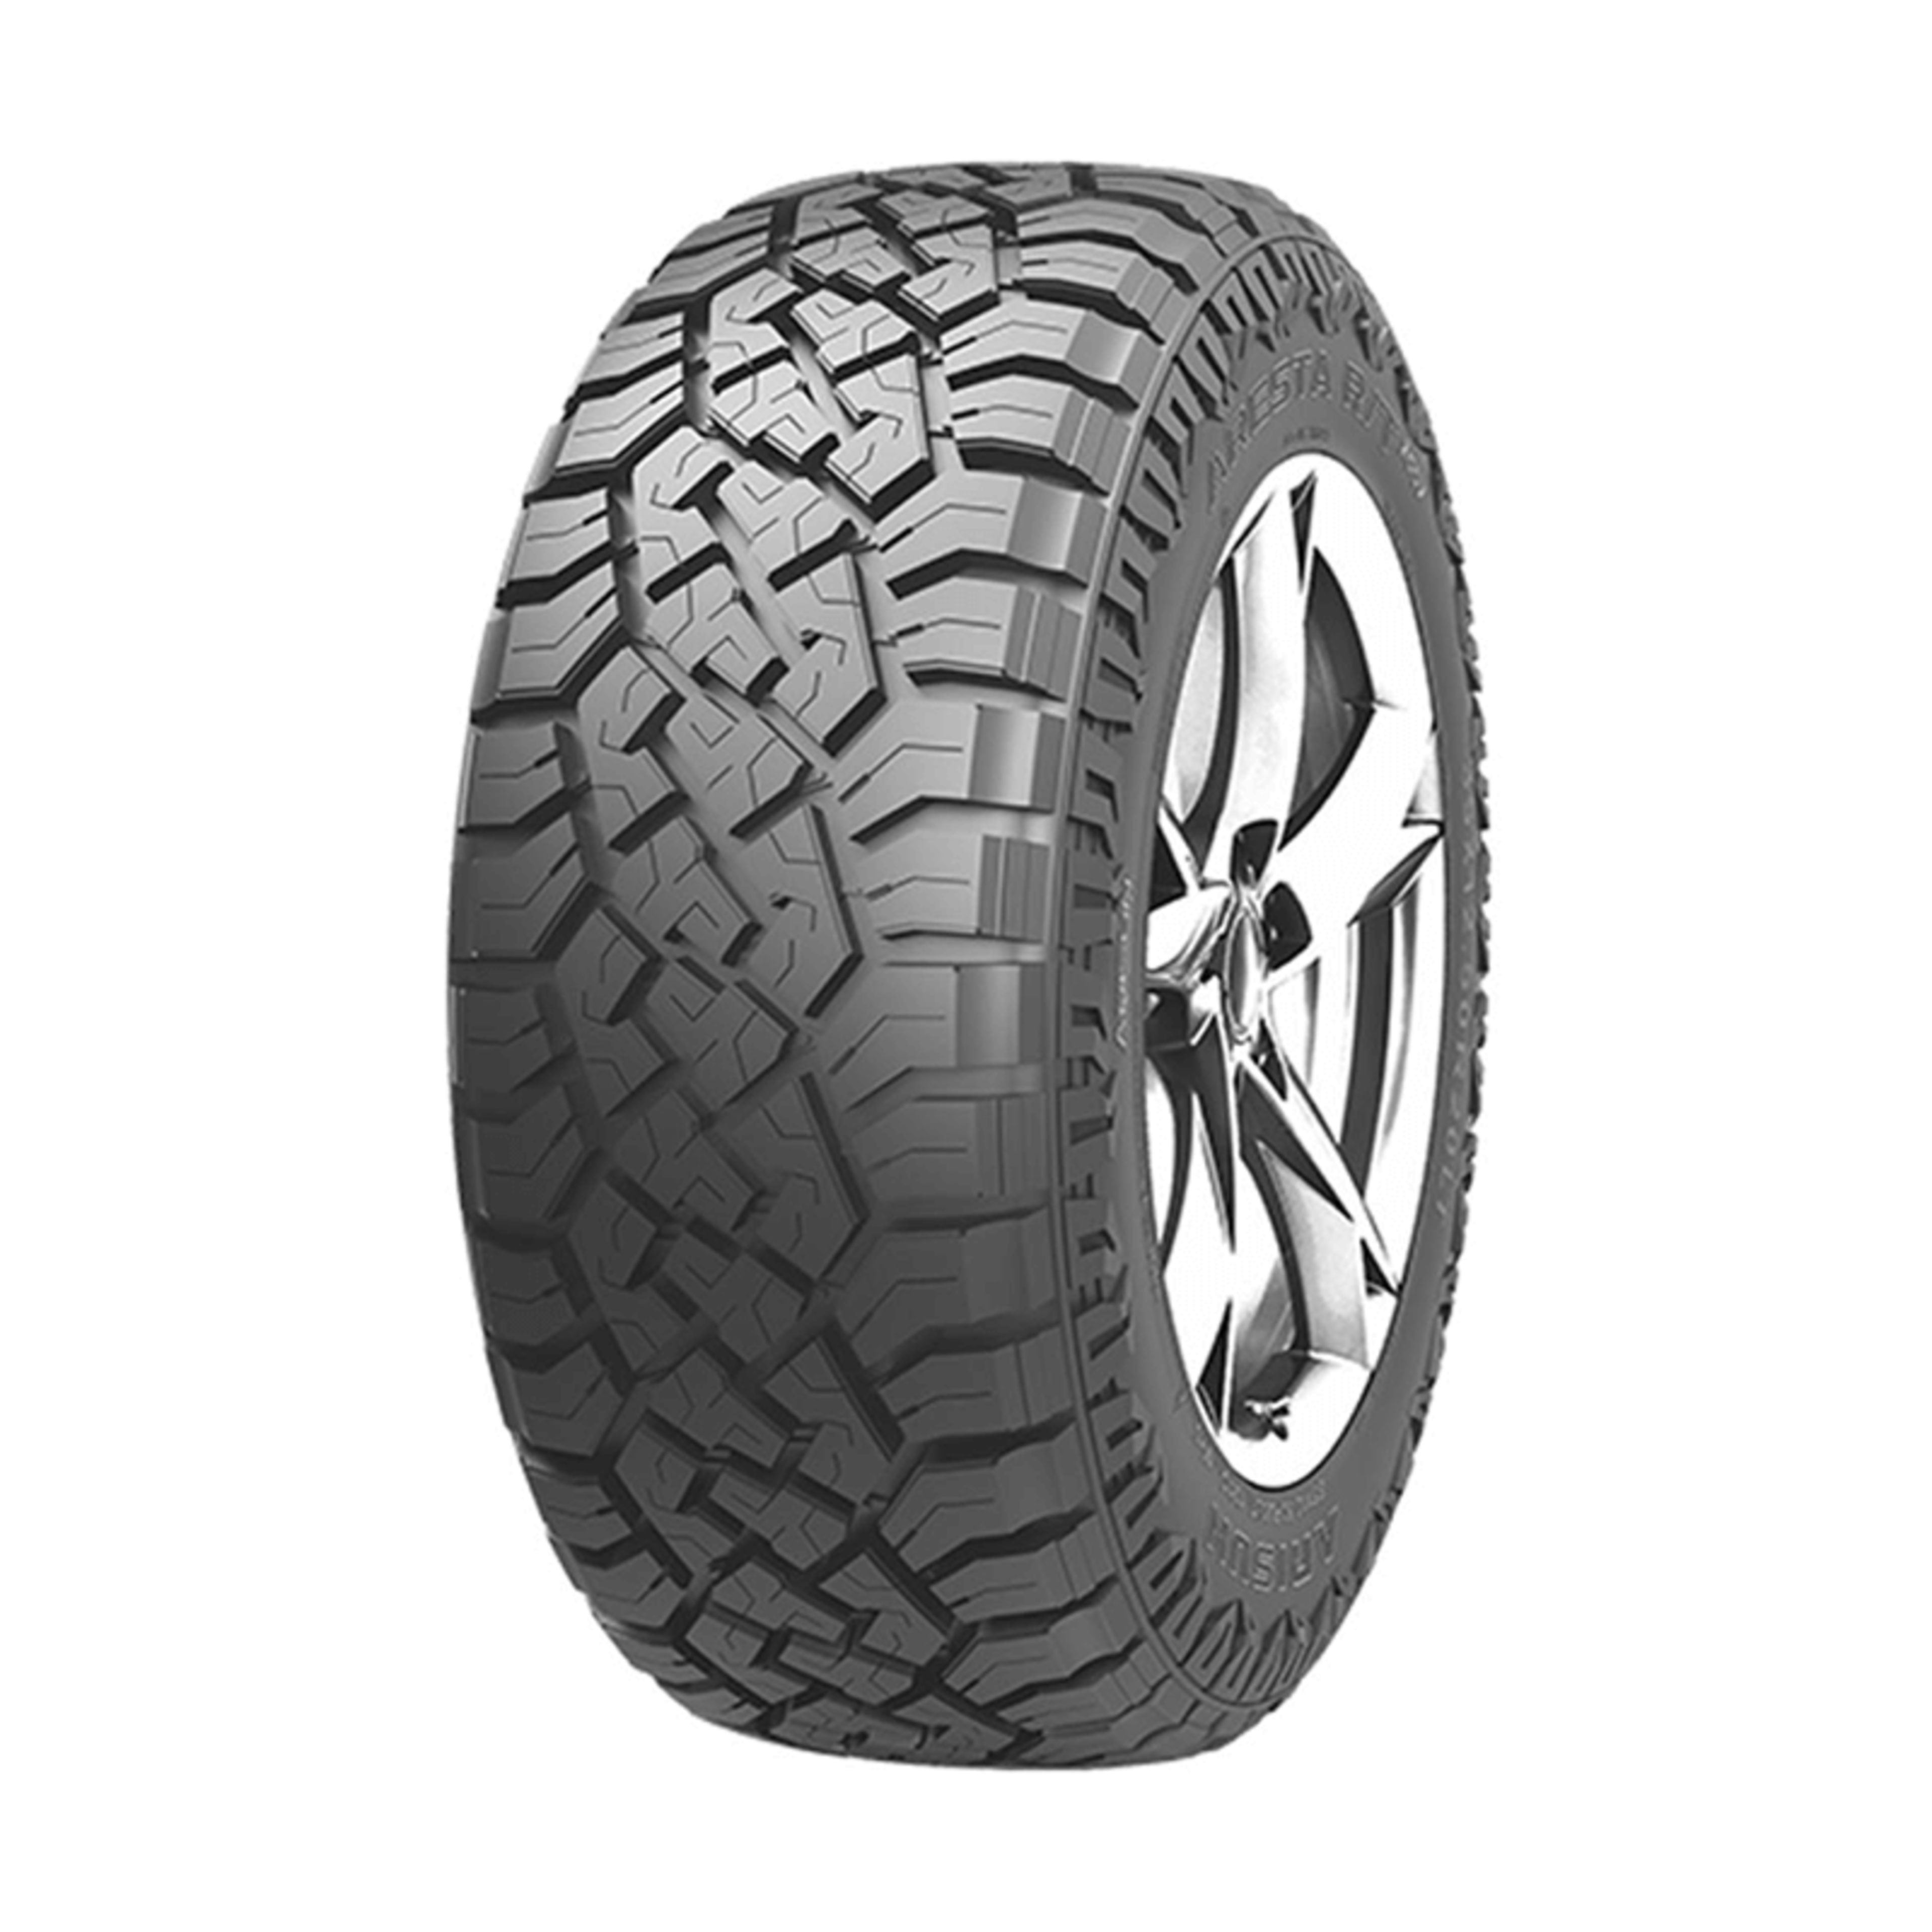 Shop for 275/65R18 Tires for Your Vehicle | SimpleTire